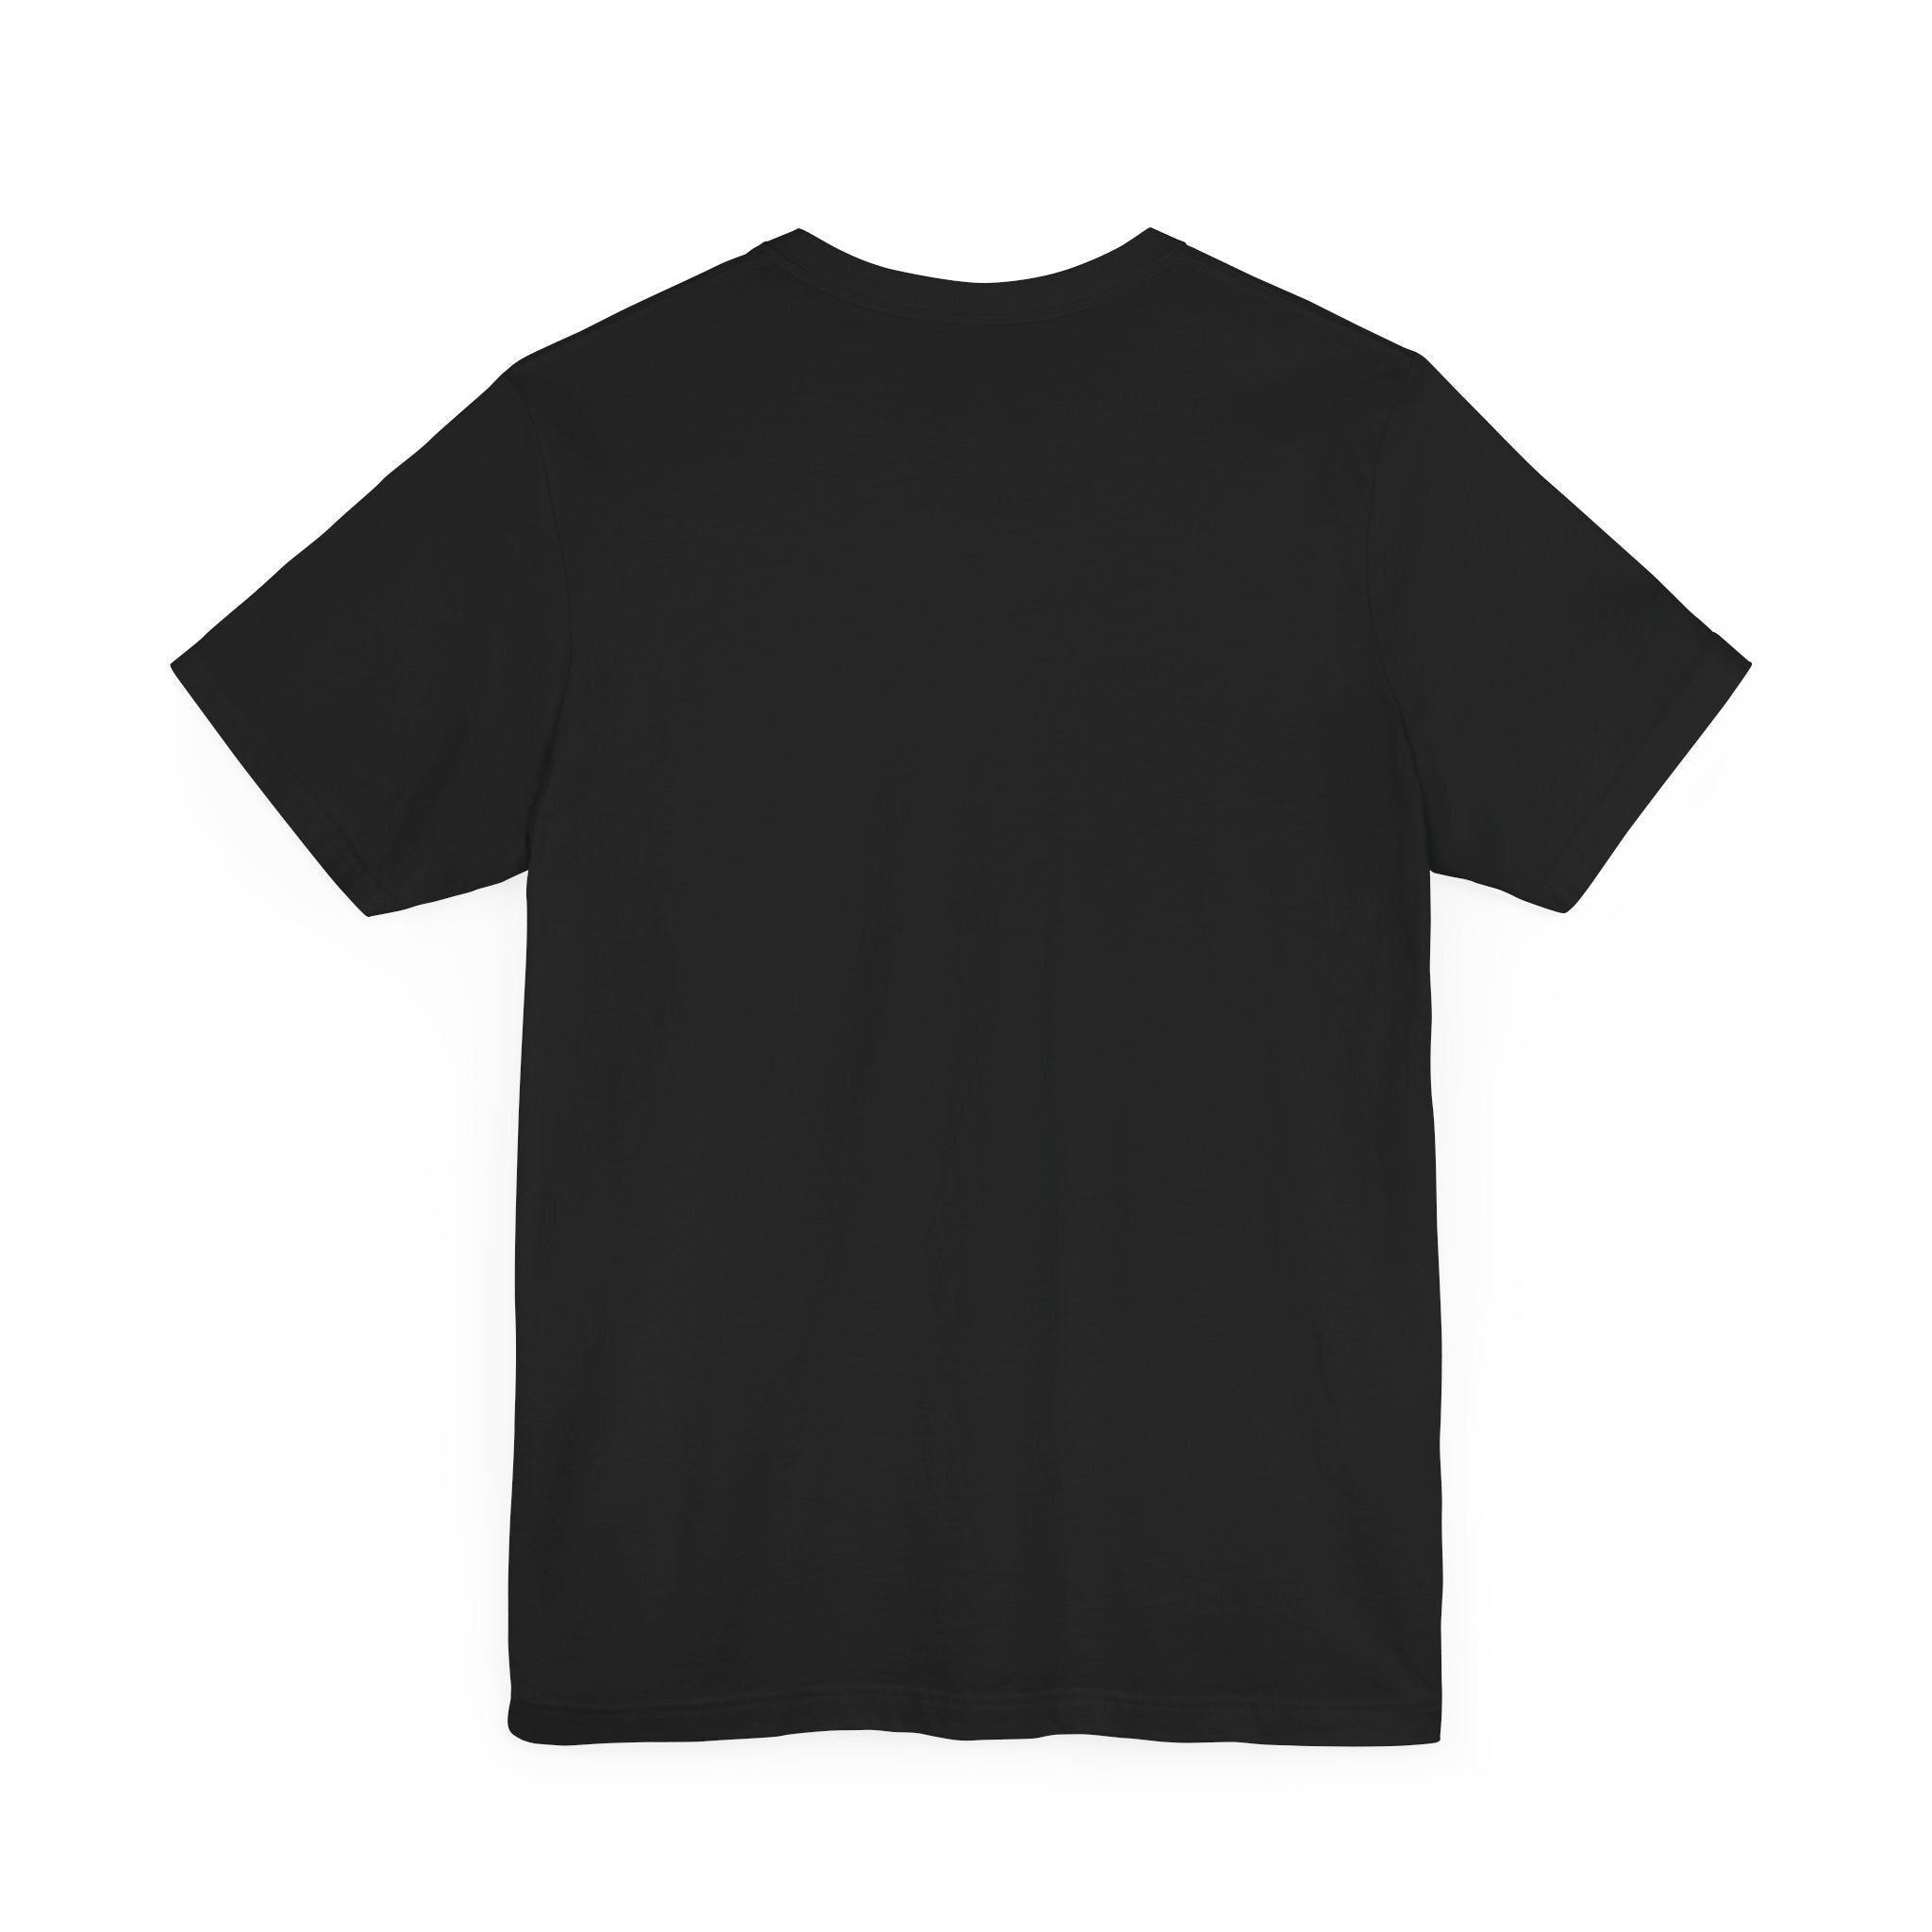 A plain black Binary Rain Cloud - T-Shirt, crafted from Airlume combed, ring-spun cotton, displayed on a white background and viewed from the back.